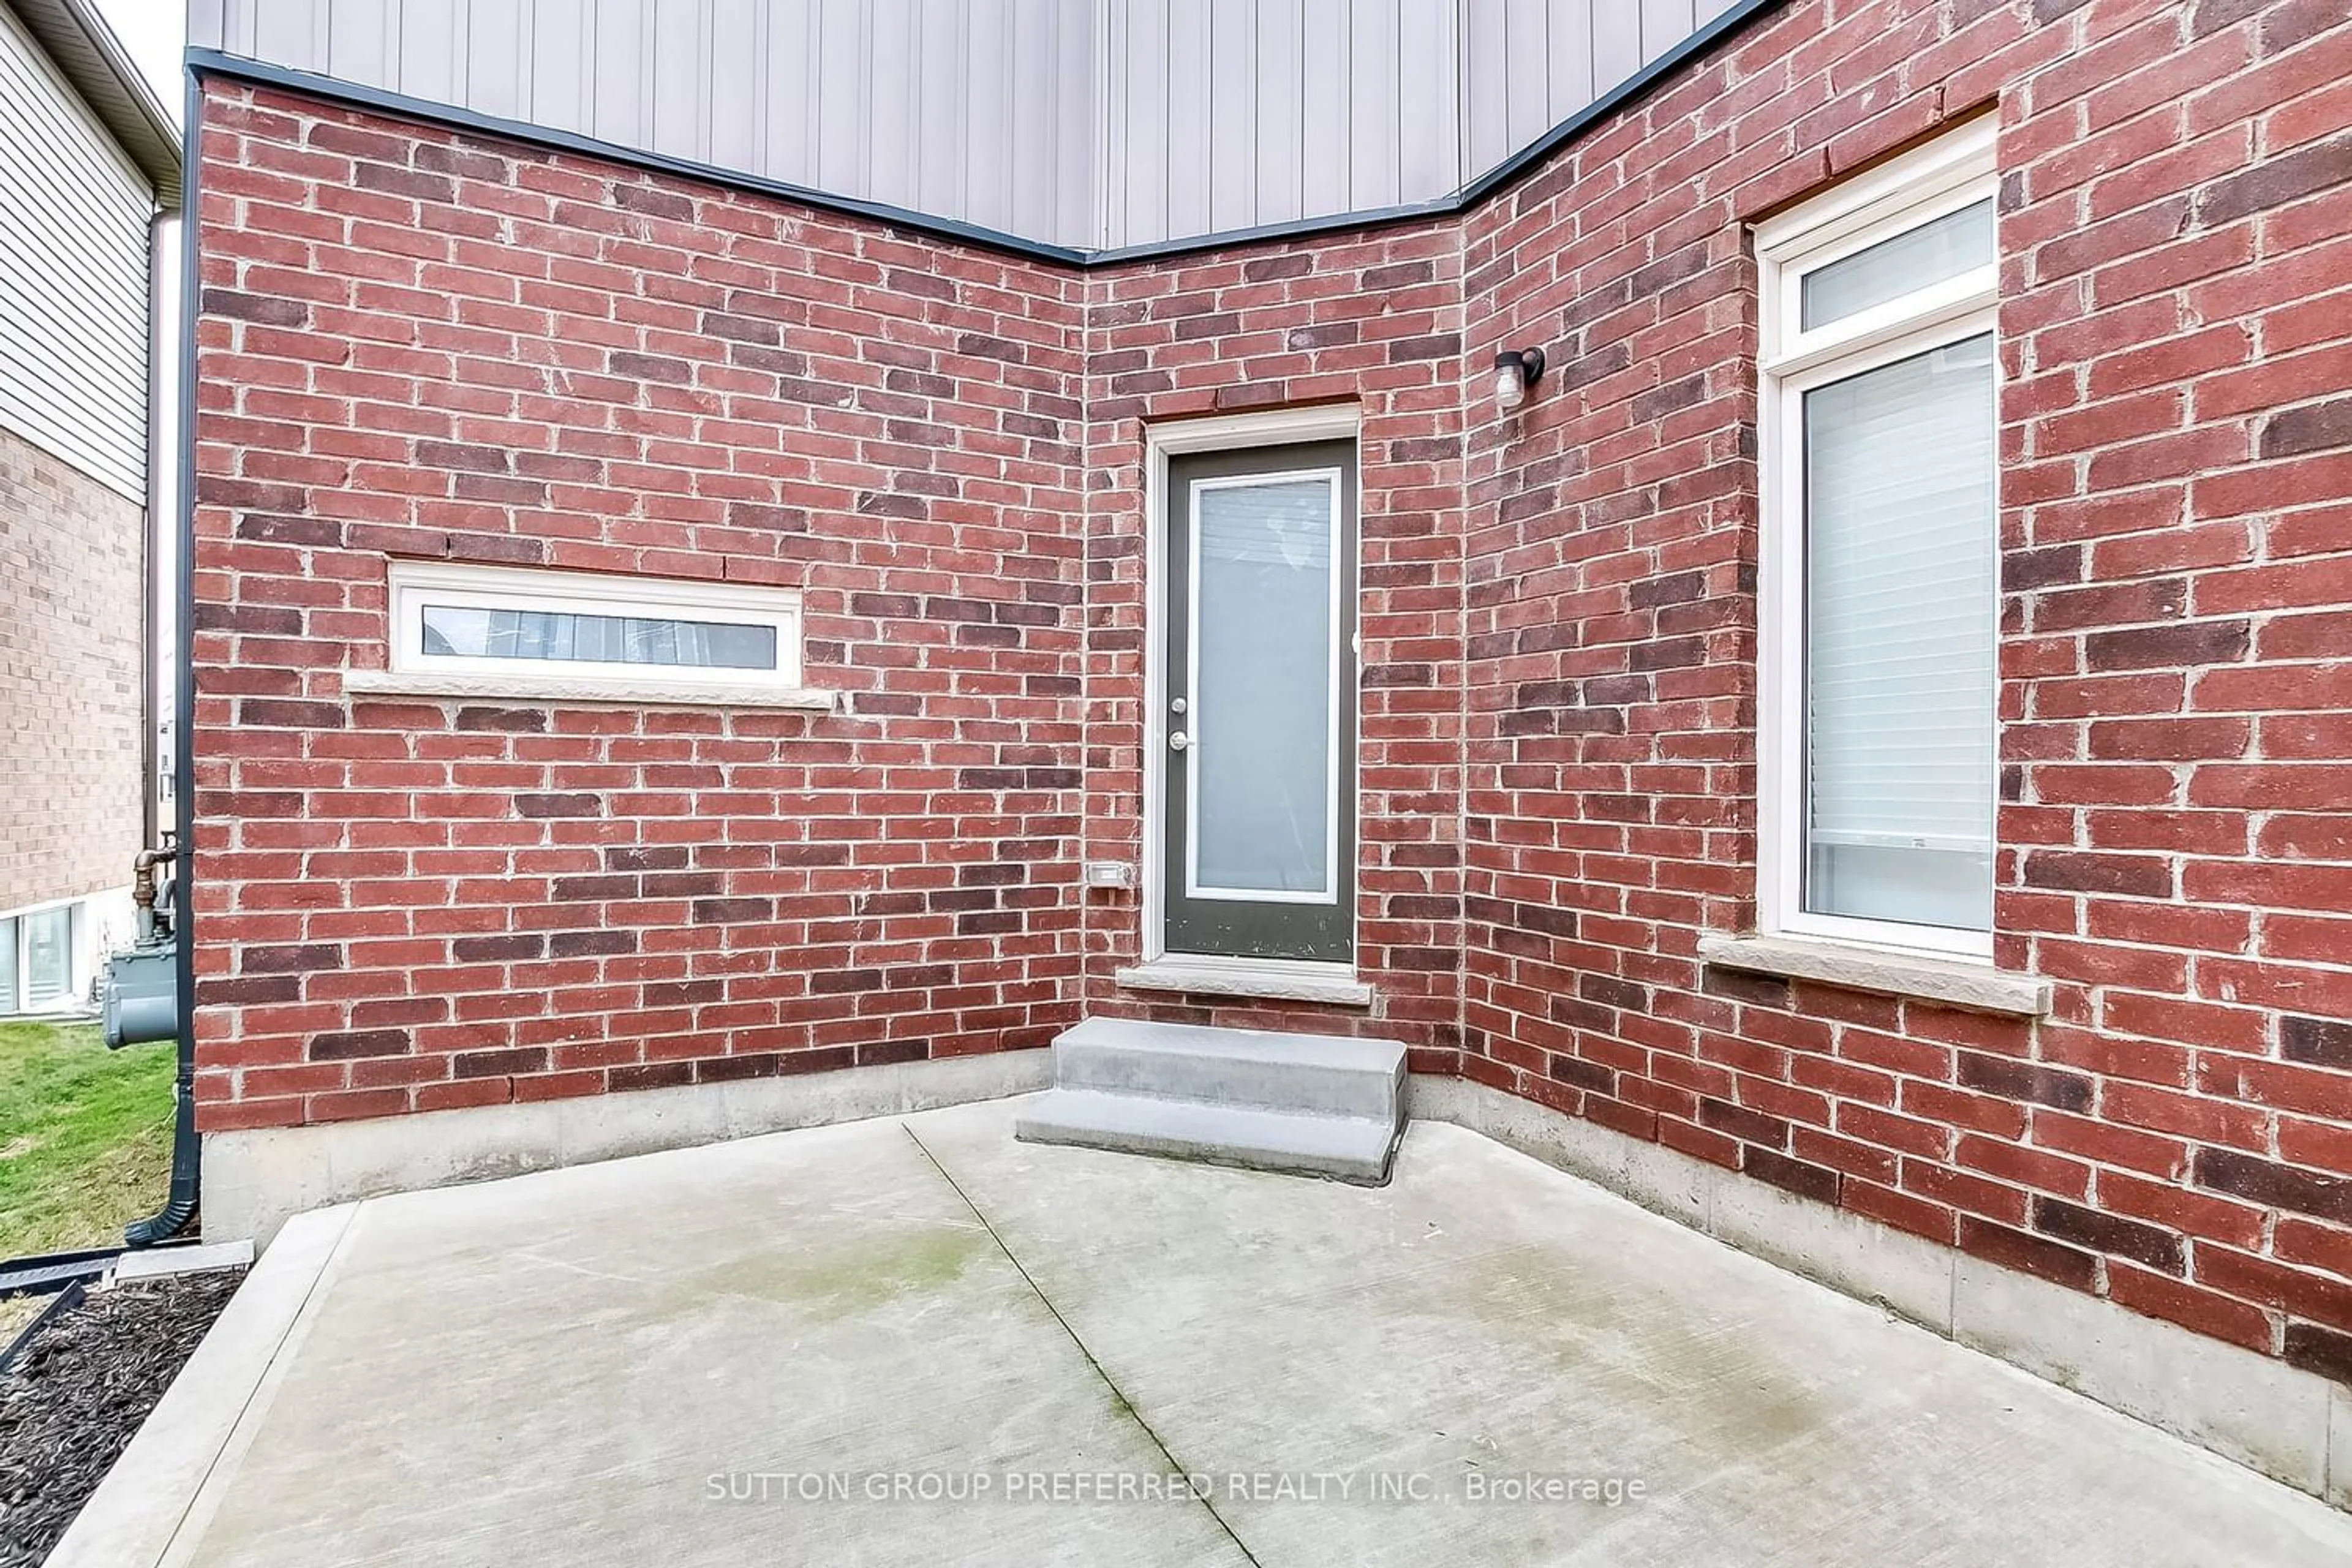 Home with brick exterior material for 3270 Singleton Ave #60, London Ontario N6L 0B5